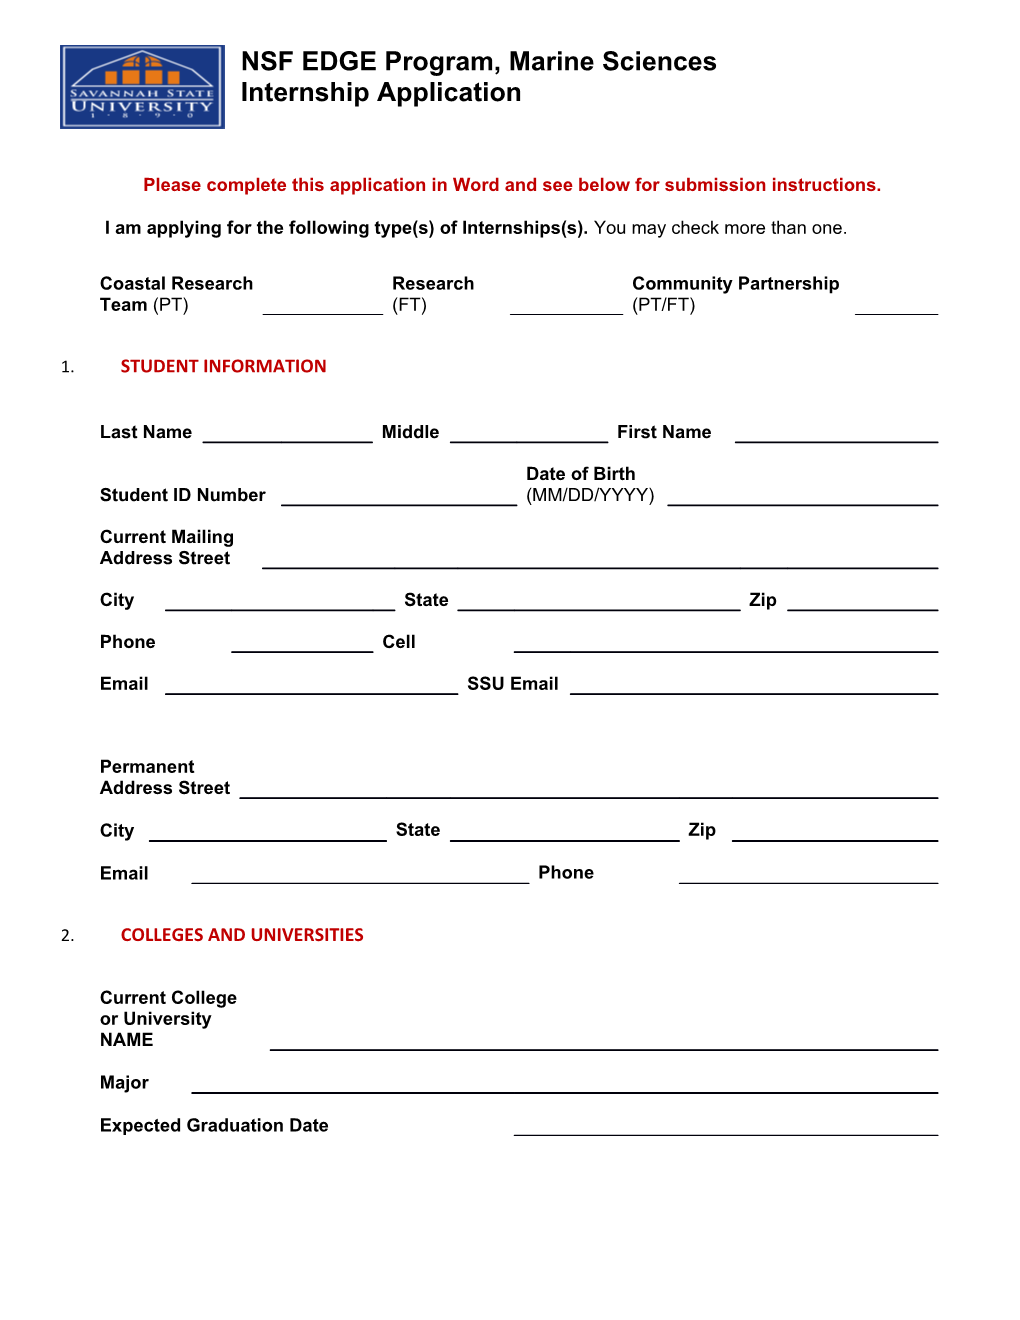 Please Complete This Application in Word and See Below for Submission Instructions